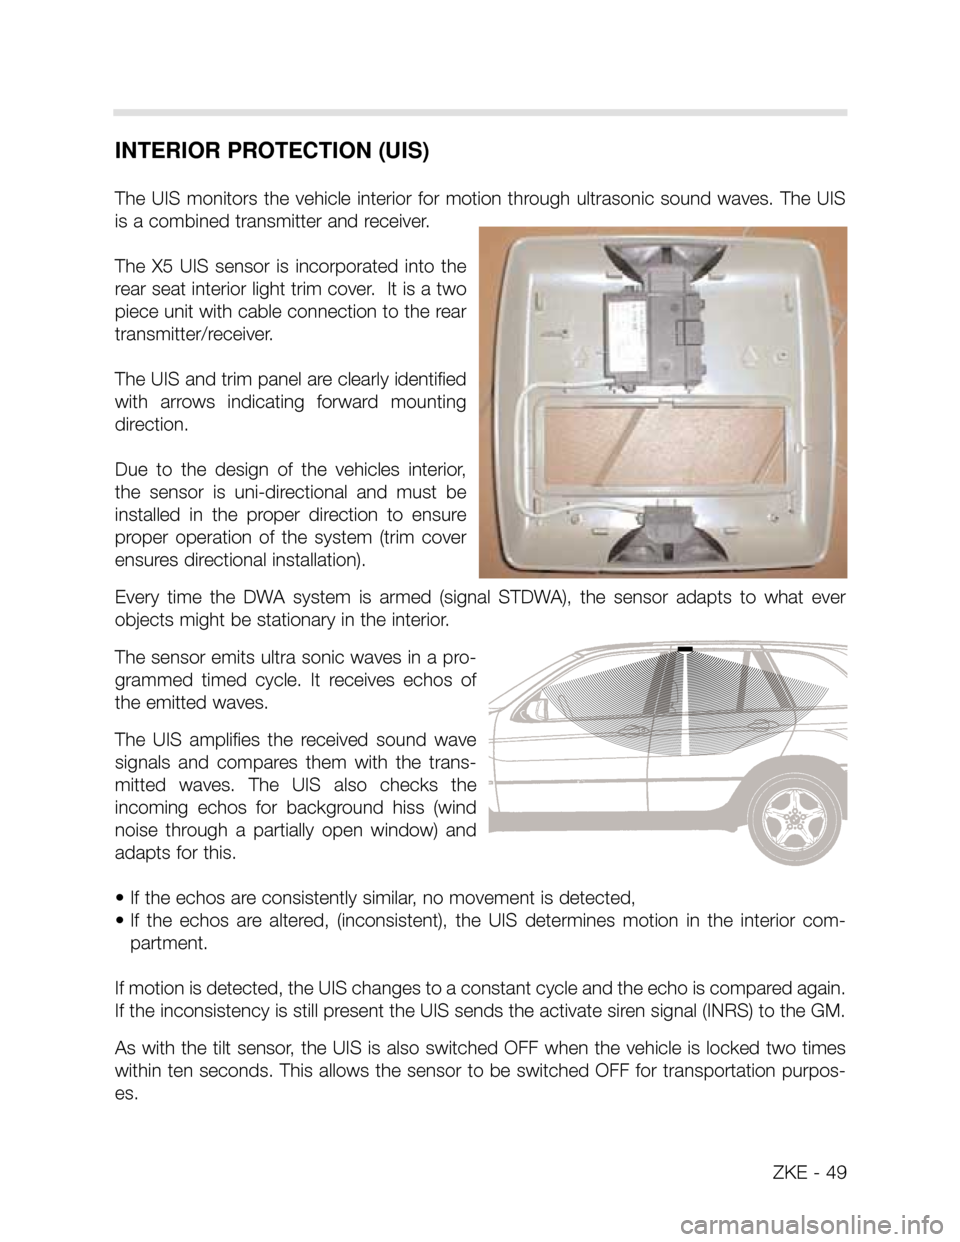 BMW X5 2006 E53 Central Body Electronics Workshop Manual ZKE - 49
INTERIOR PROTECTION (UIS)
The  UIS  monitors  the  vehicle  interior  for  motion  through  ultrasonic  sound  waves.  The  UIS
is a combined transmitter and receiver. 
The  X5  UIS  sensor  